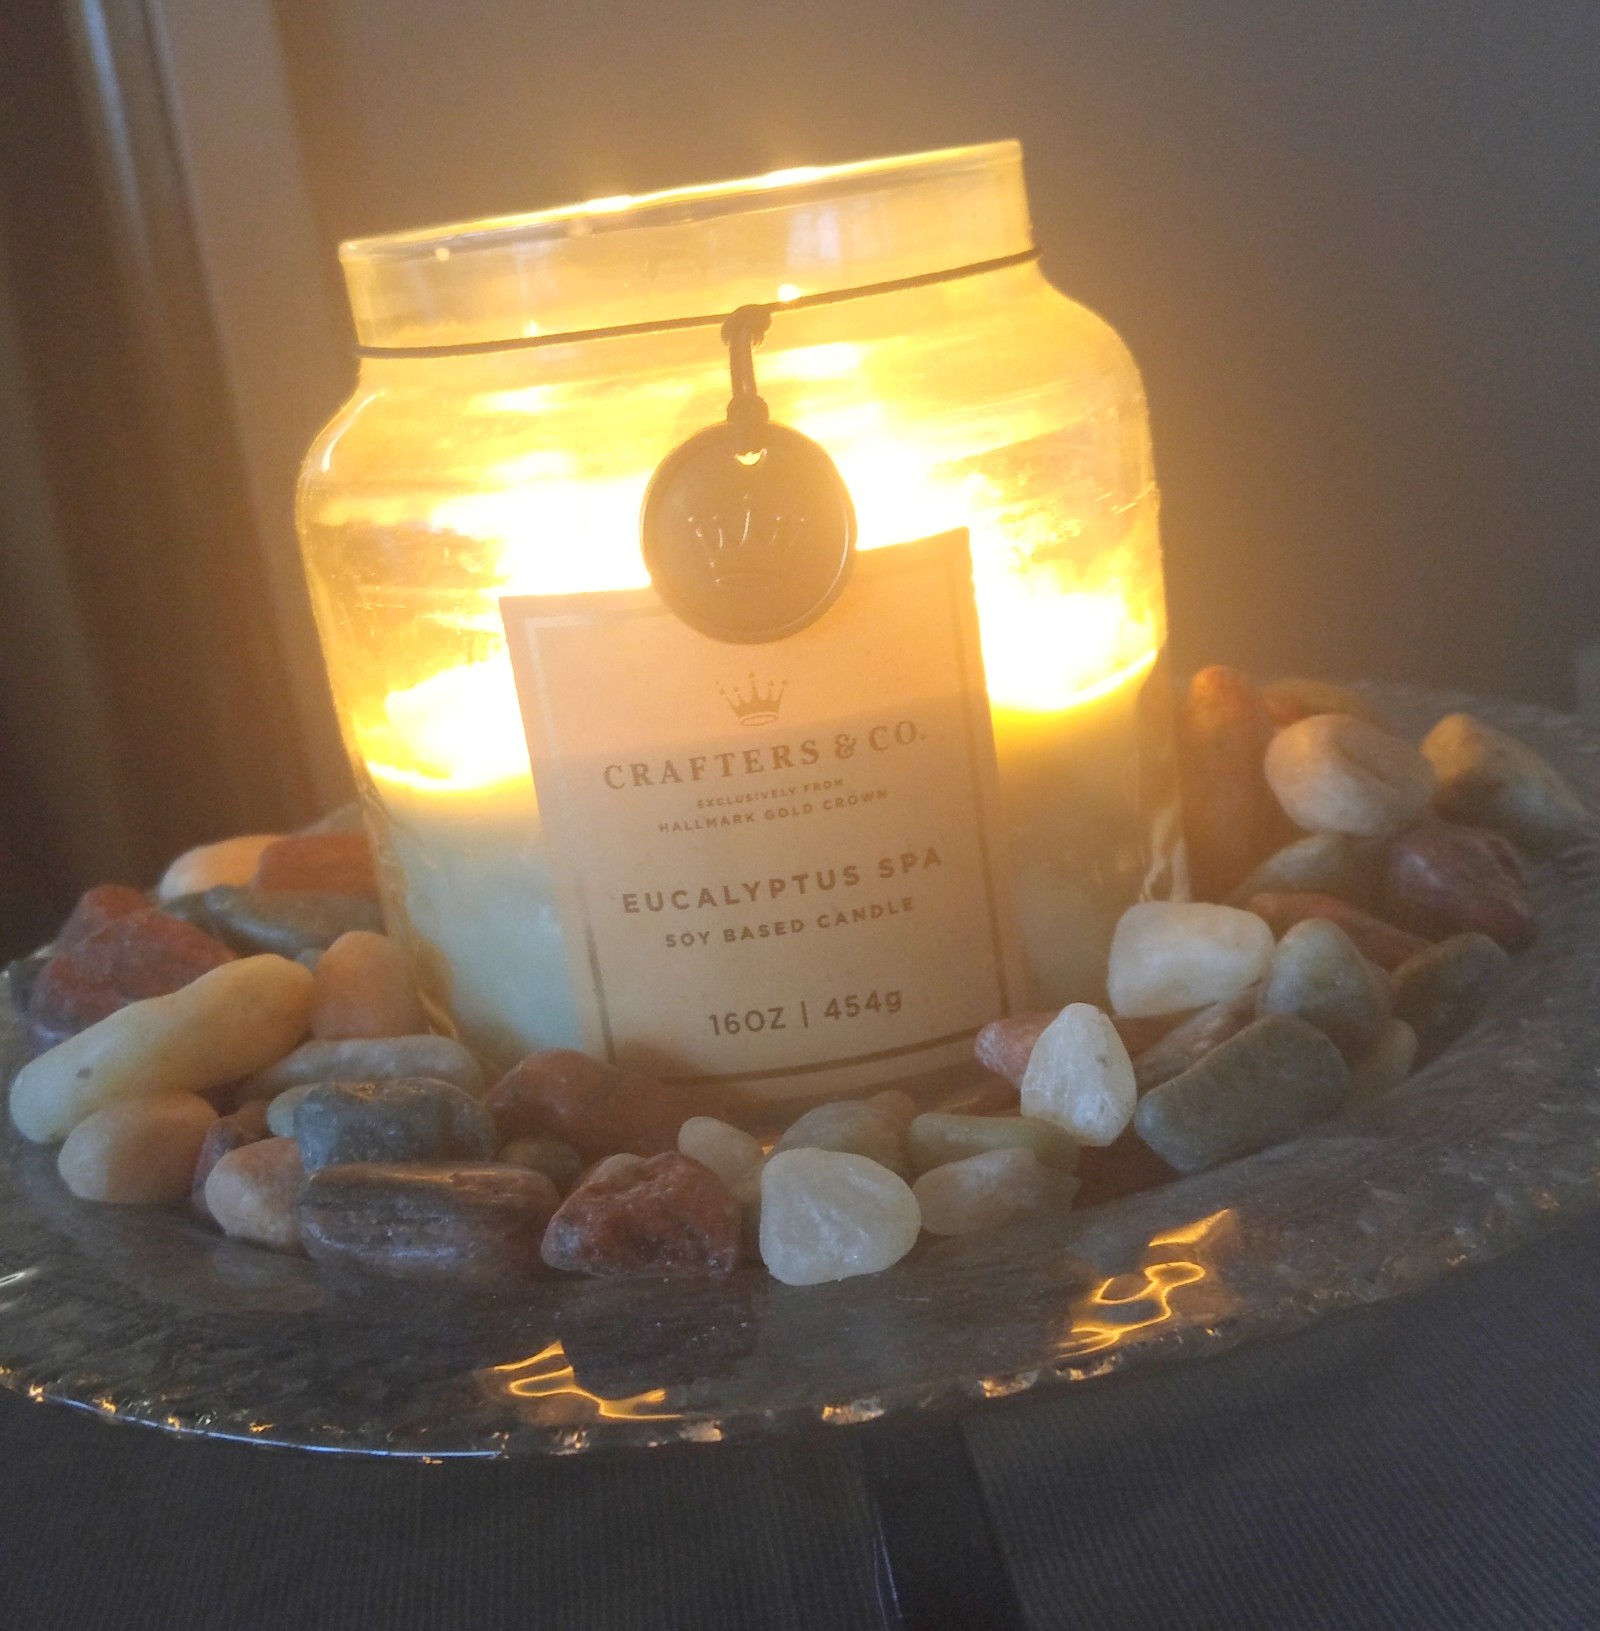 Crafters & Co. Eucalyptus Spa Candle from Hallmark Gold Crown